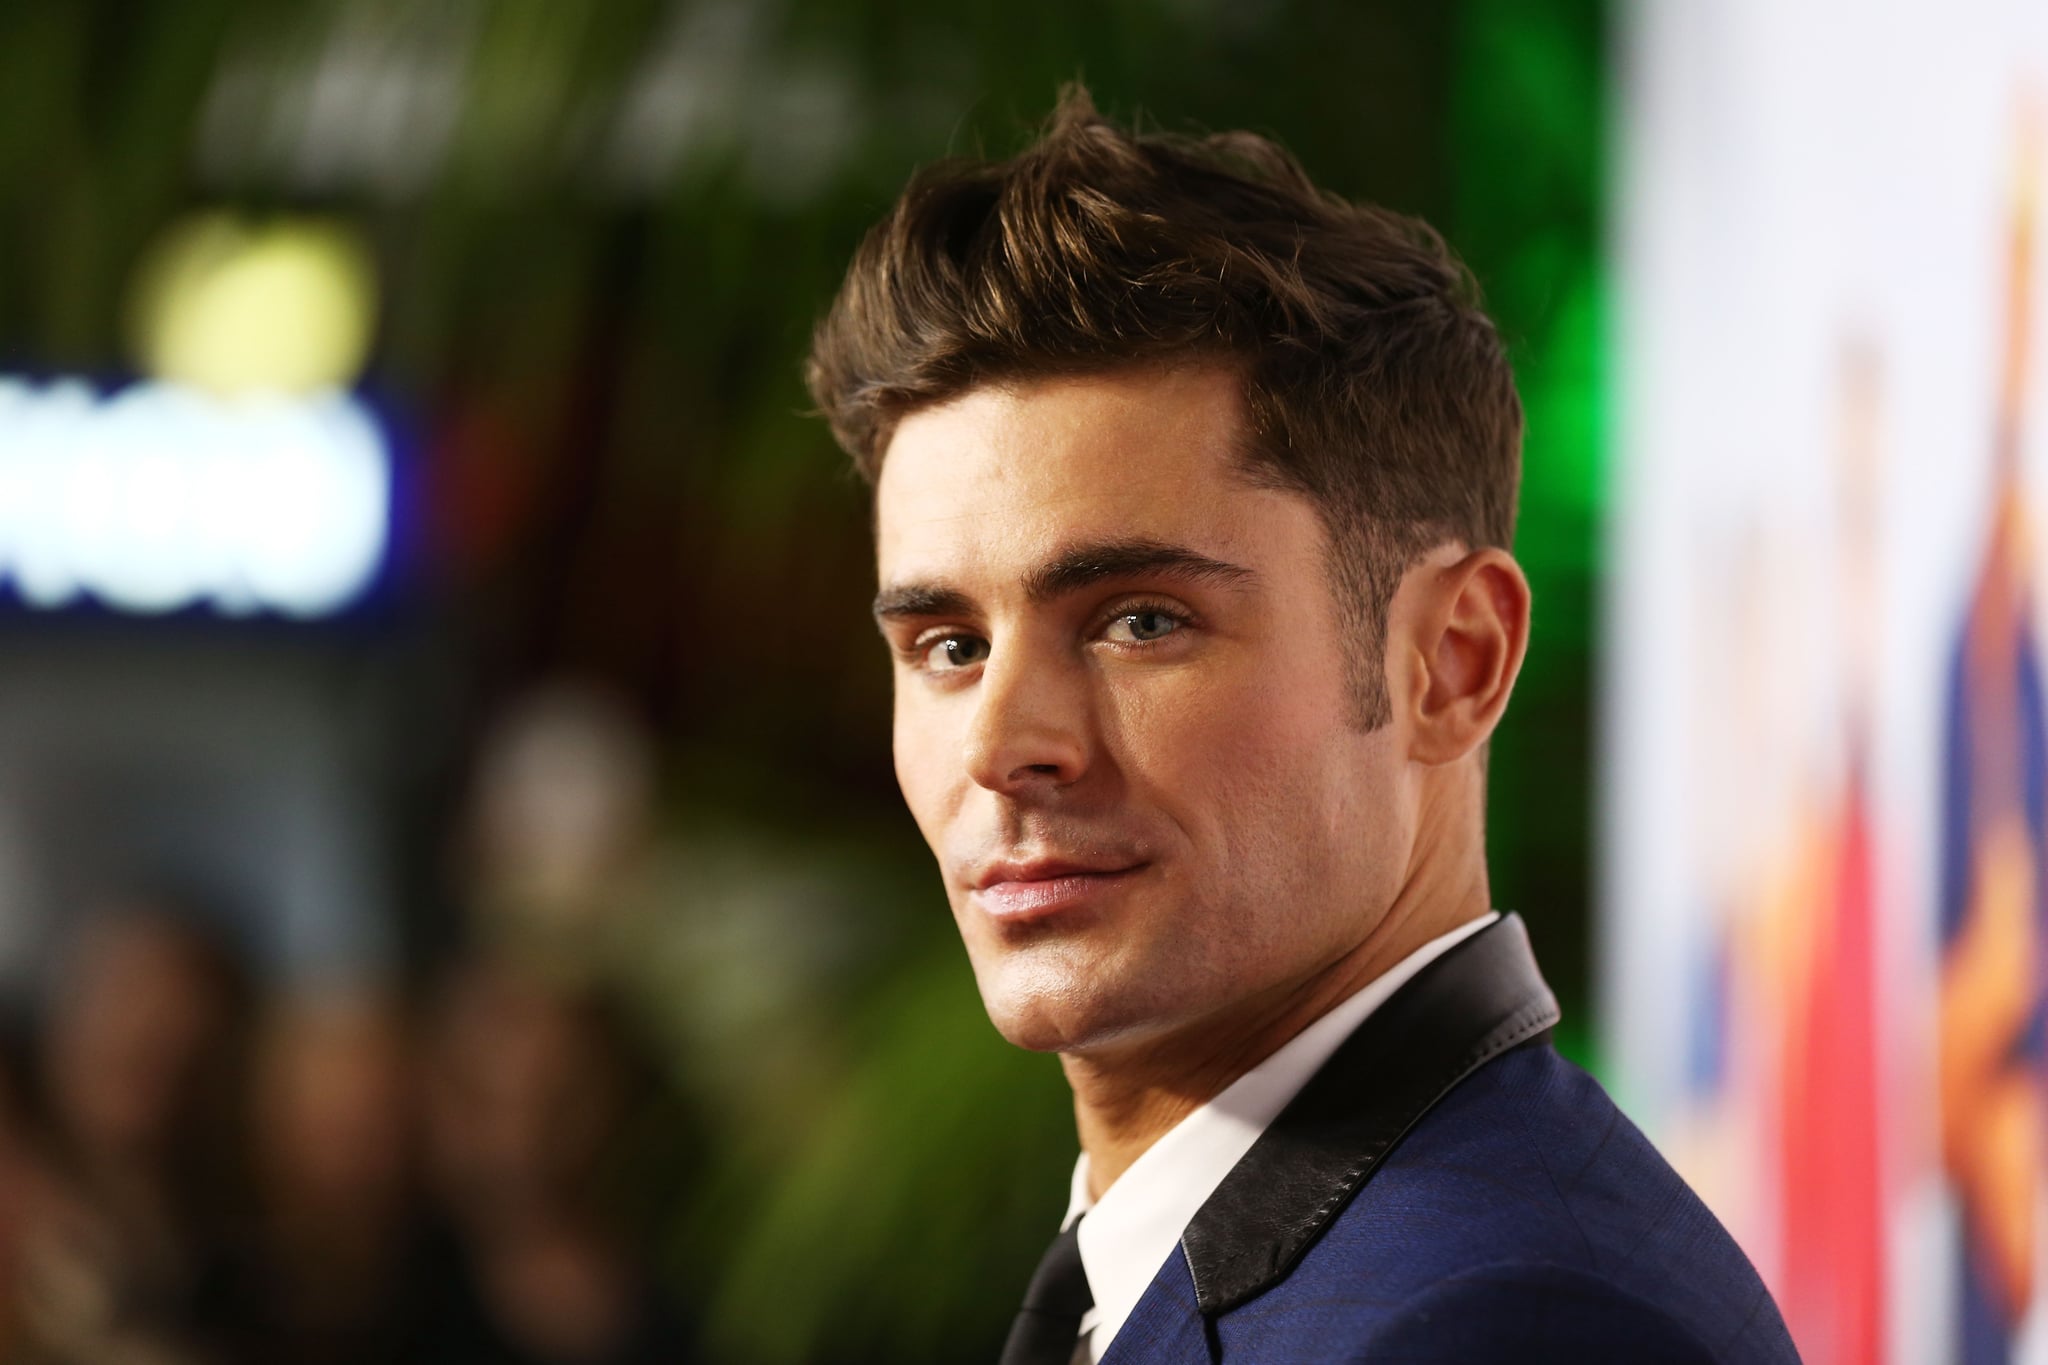 SYDNEY, AUSTRALIA - MAY 18:  Zac Efron attends the Australian premiere of 'Baywatch' at Hoyts EQ on May 18, 2017 in Sydney, Australia.  (Photo by Brendon Thorne/Getty Images for Paramount Pictures)